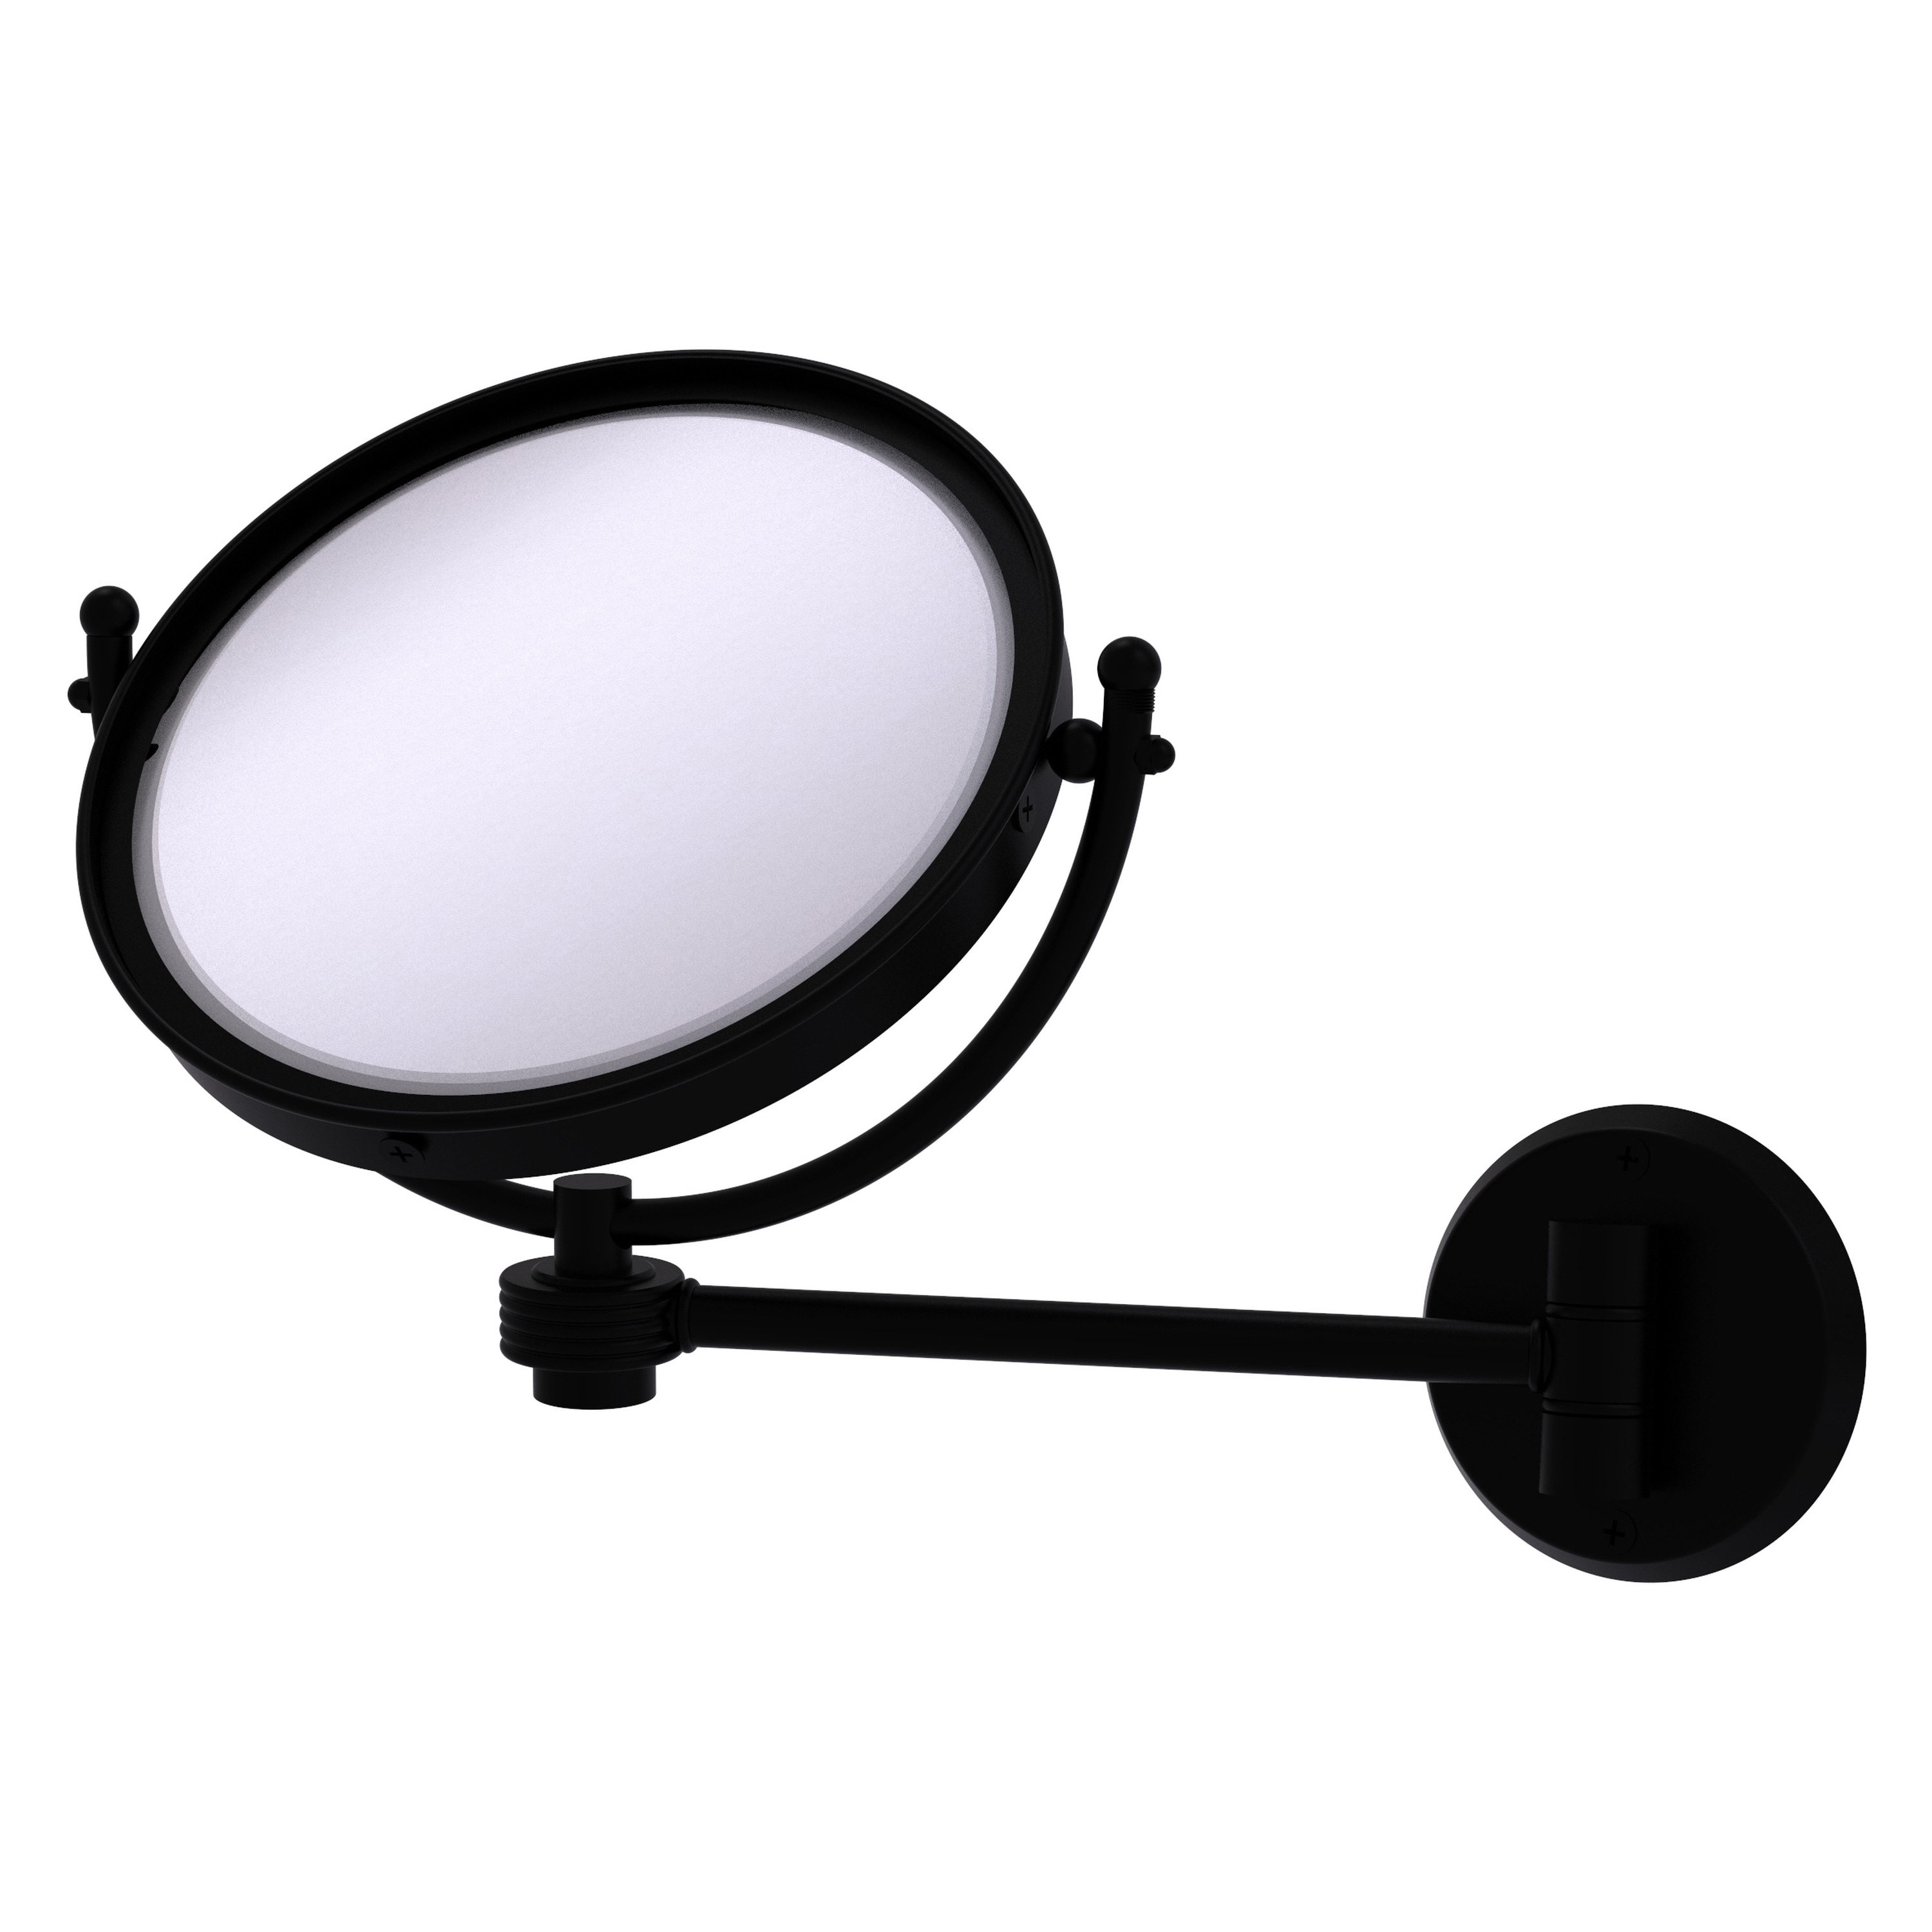 8-in x 10-in Matte Gray Double-sided 5X Magnifying Wall-mounted Vanity Mirror | - Allied Brass WM-5G/4X-BKM